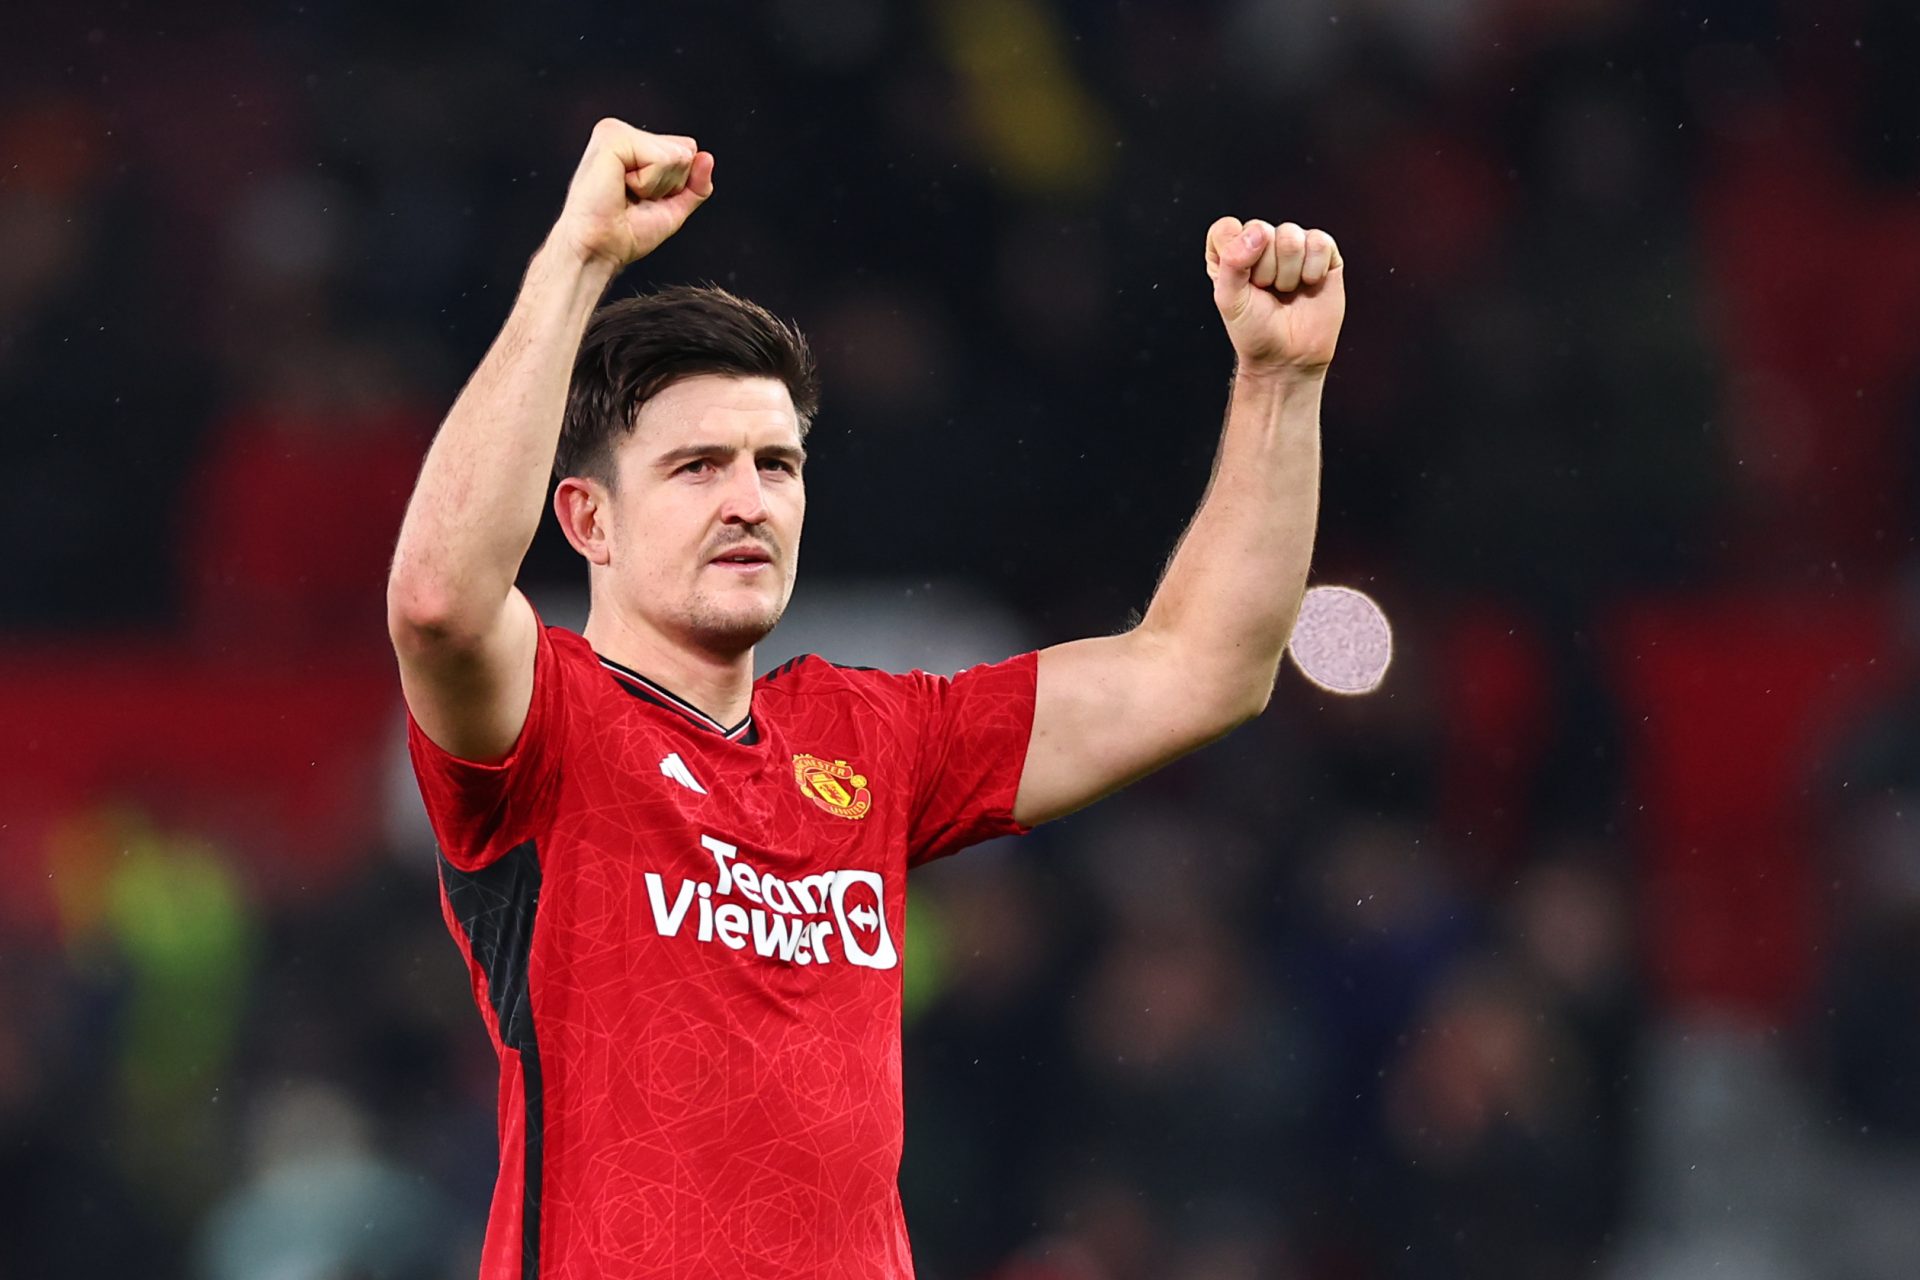 The resurgence and redemption of Harry Maguire